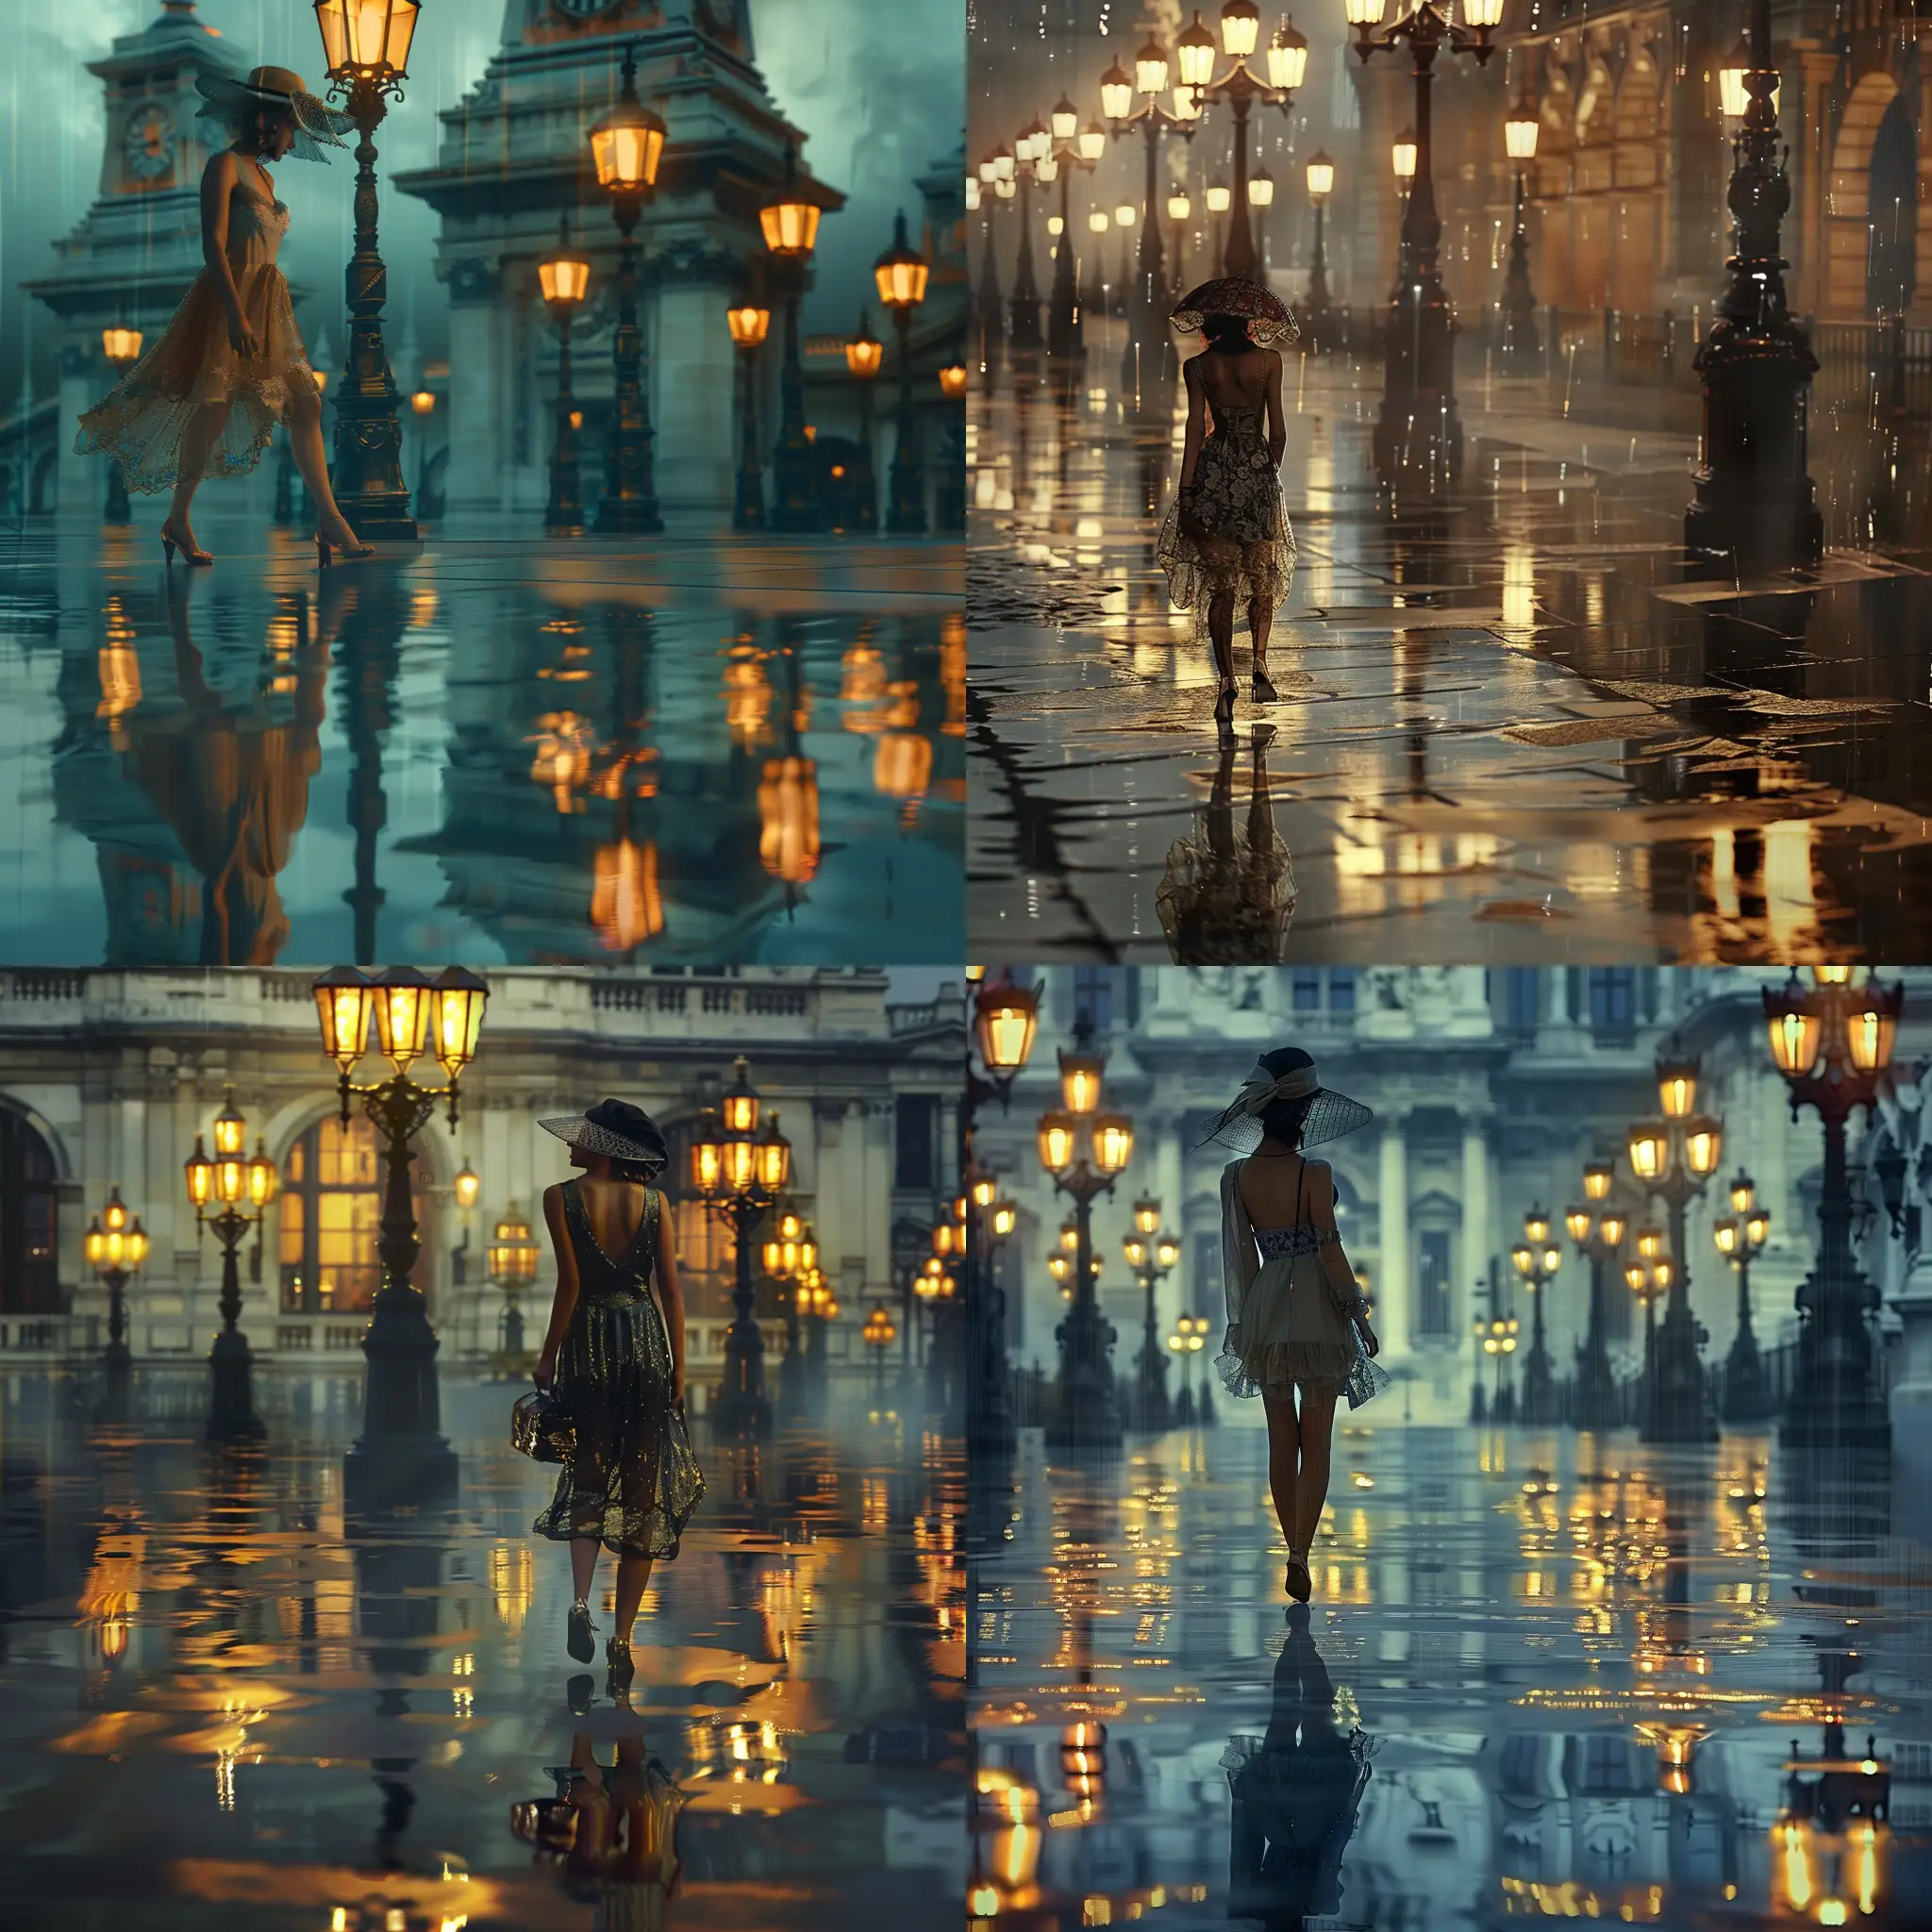 A highly detailed image of a 1920s flapper woman walking through London in the rain. The street lamps are reflecting in the pavement. Beautiful magical mysterious fantasy surreal highly detailed re